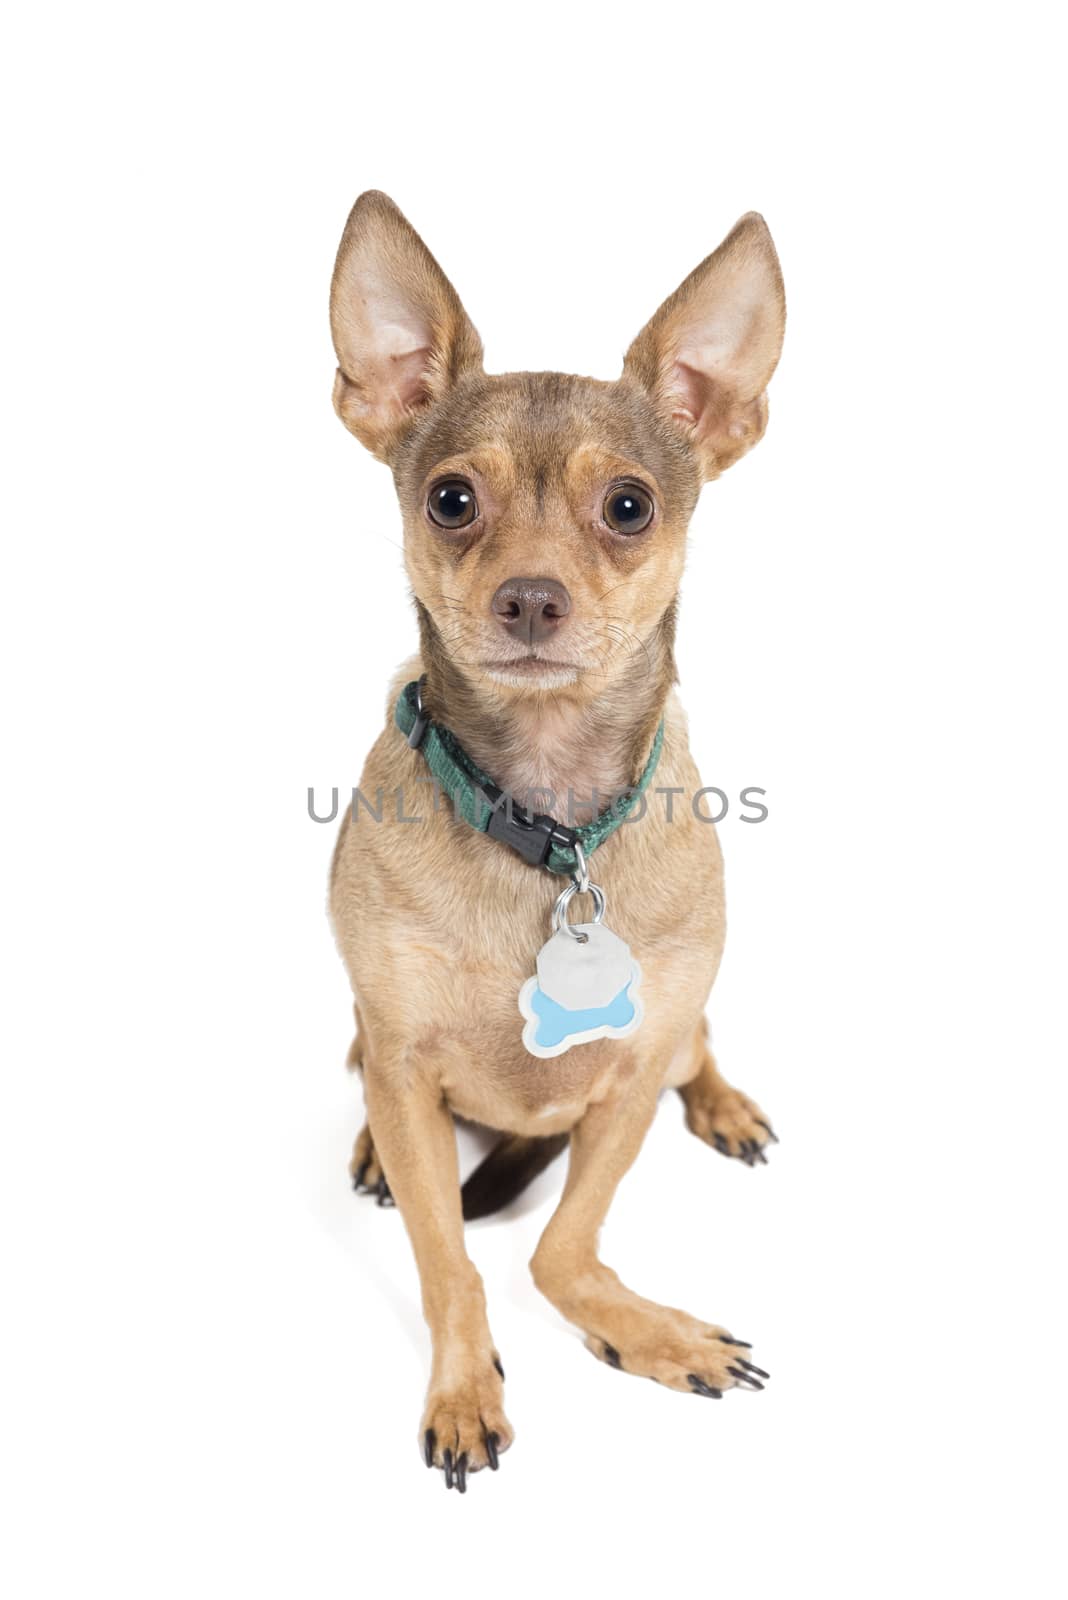 Chihuahua dog isolated against a white background by Njean